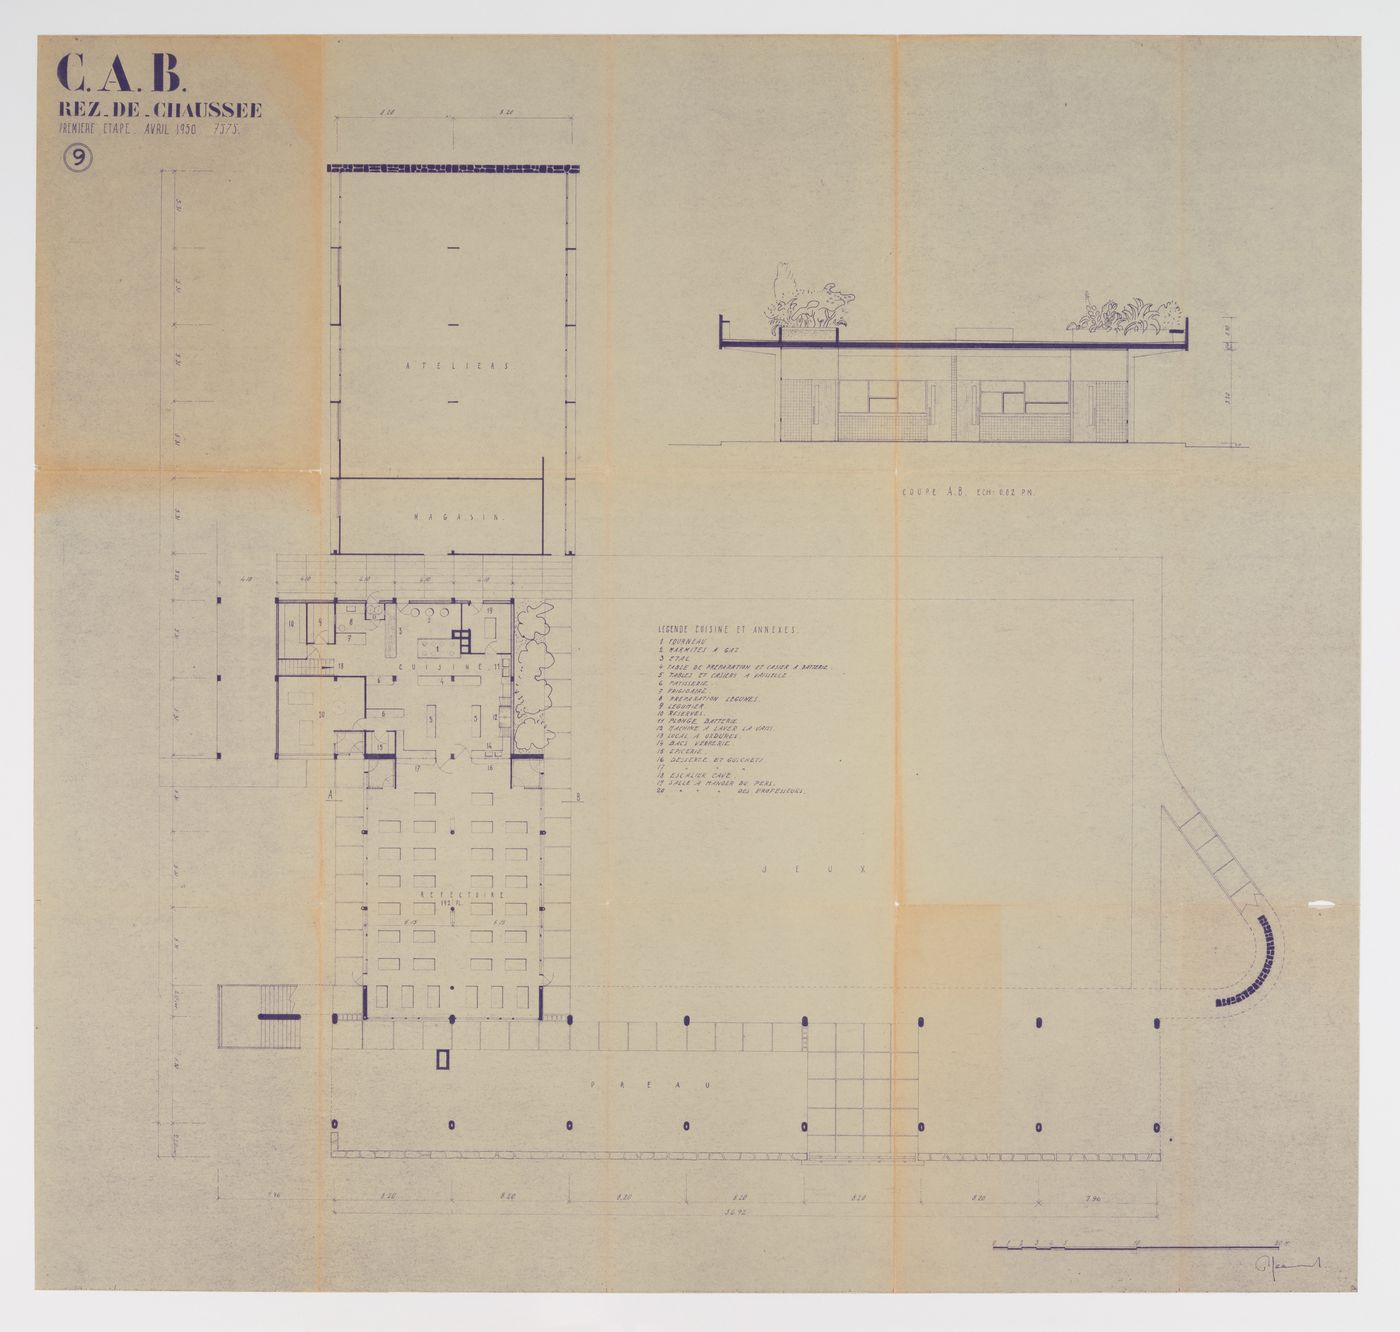 Floor plan for the Centre d'Apprentissage in Béziers, France